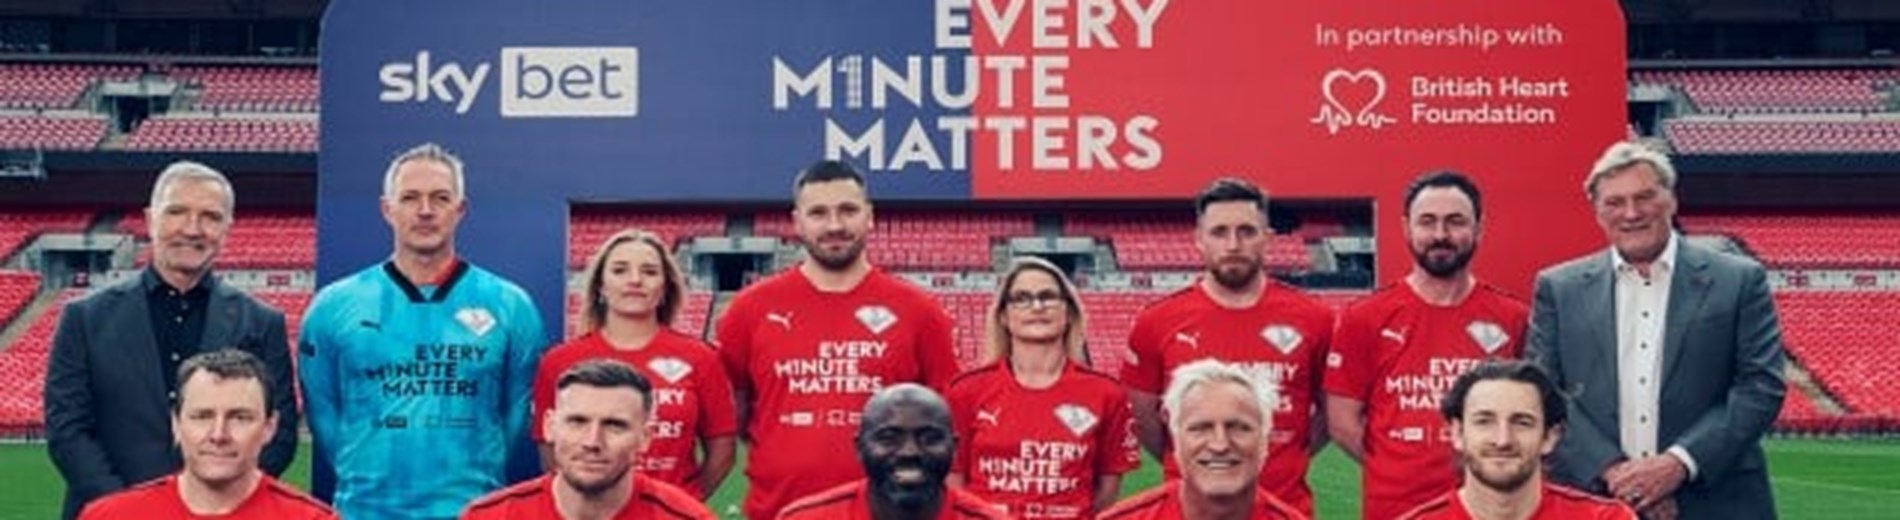 Football legends inspire the nation to learn lifesaving CPR